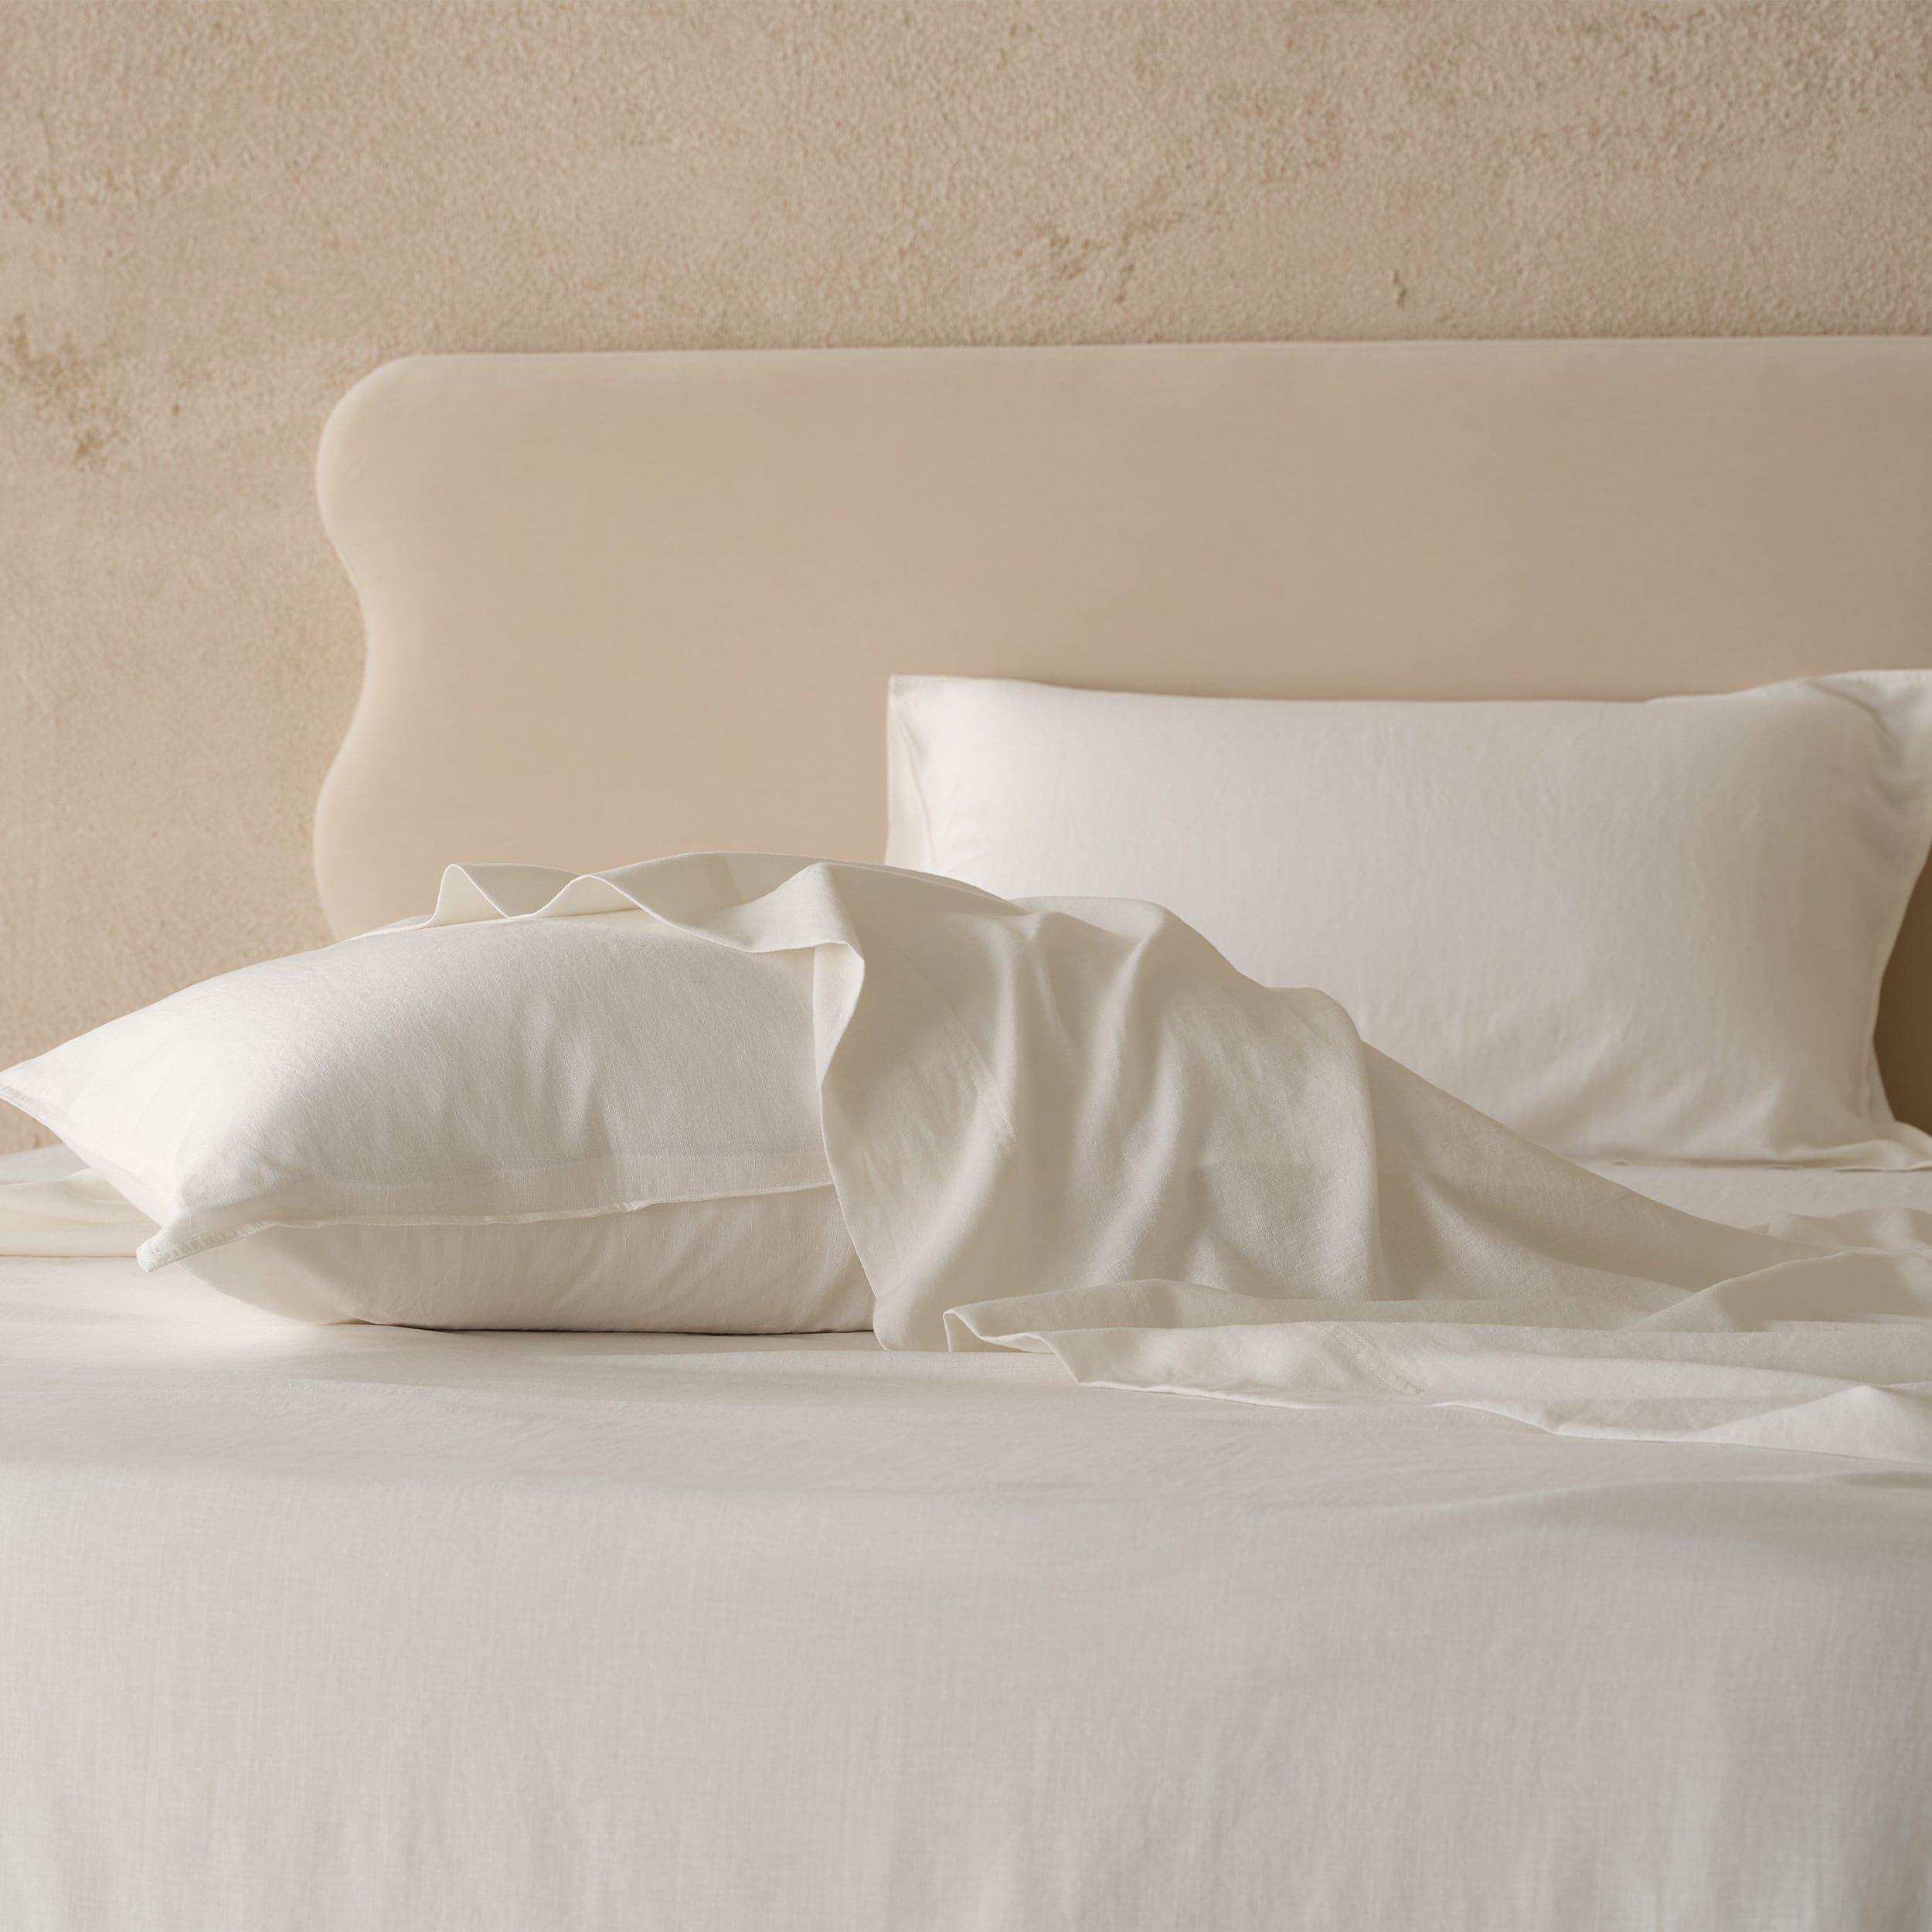 Select a premium sheet set king size to elevate the comfort of your bed.